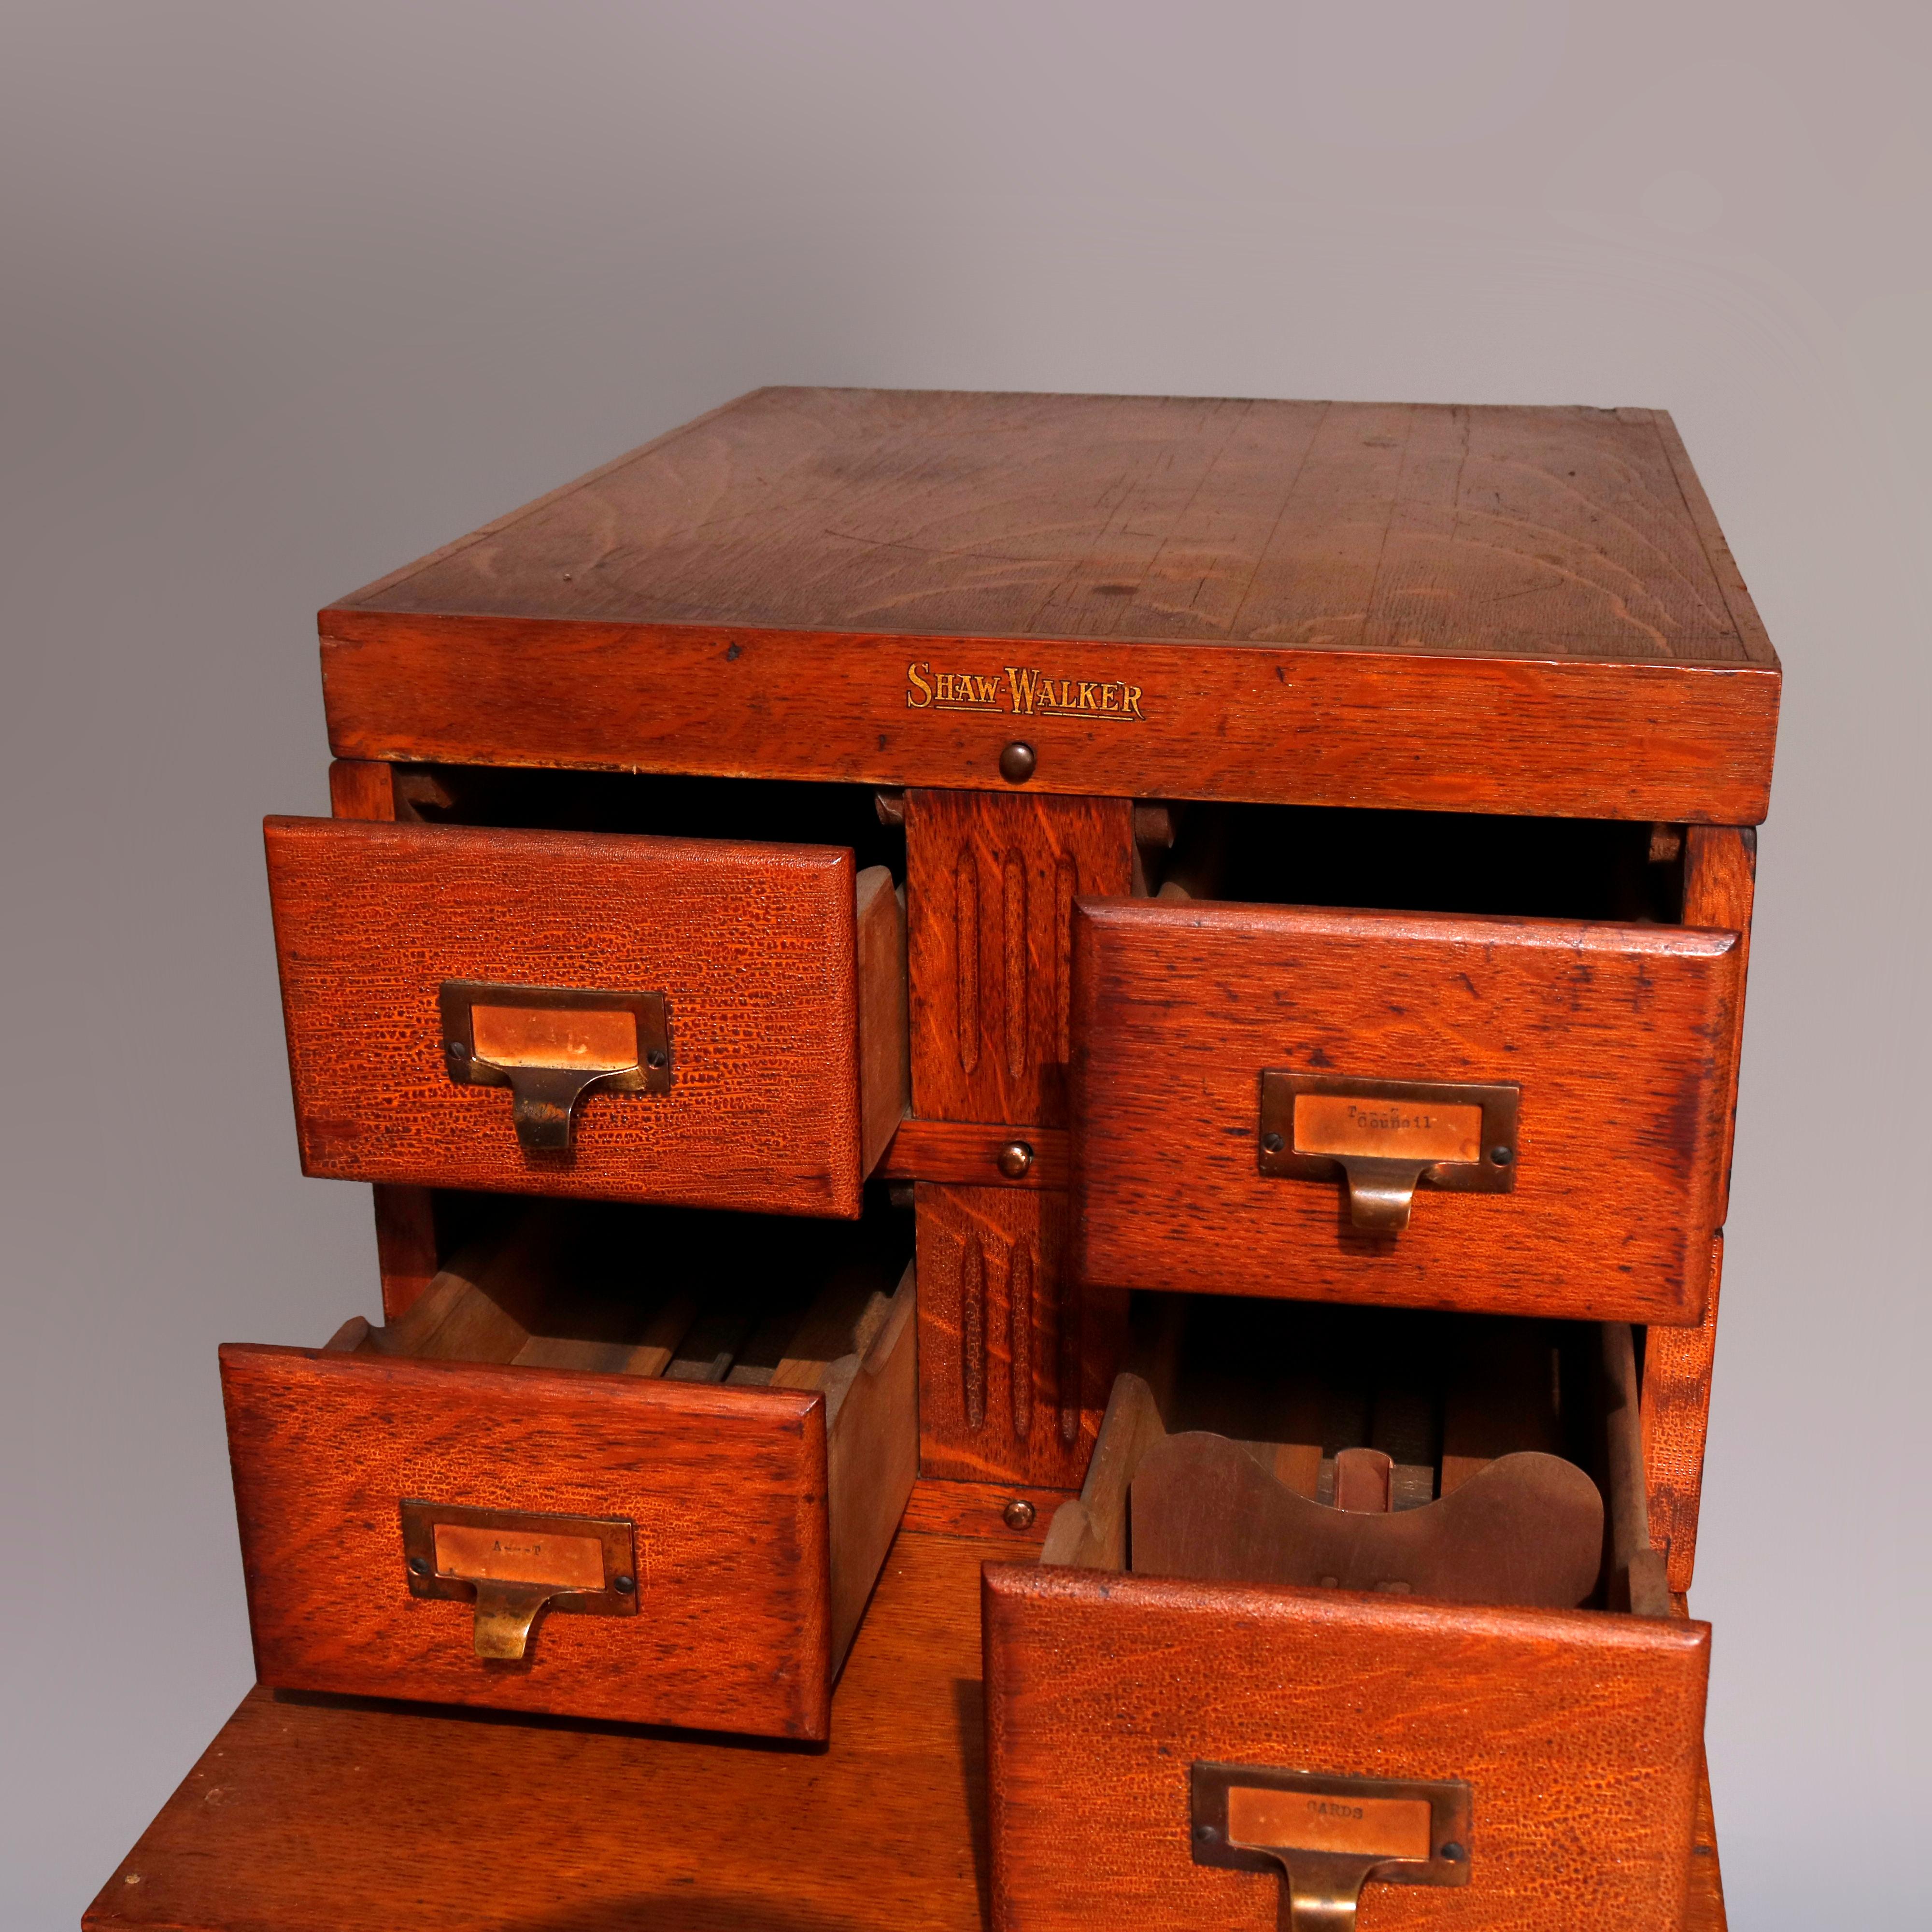 Arts and Crafts Arts & Crafts Oak 4-Section Stack Filing Cabinet by Shaw Walker, circa 1910